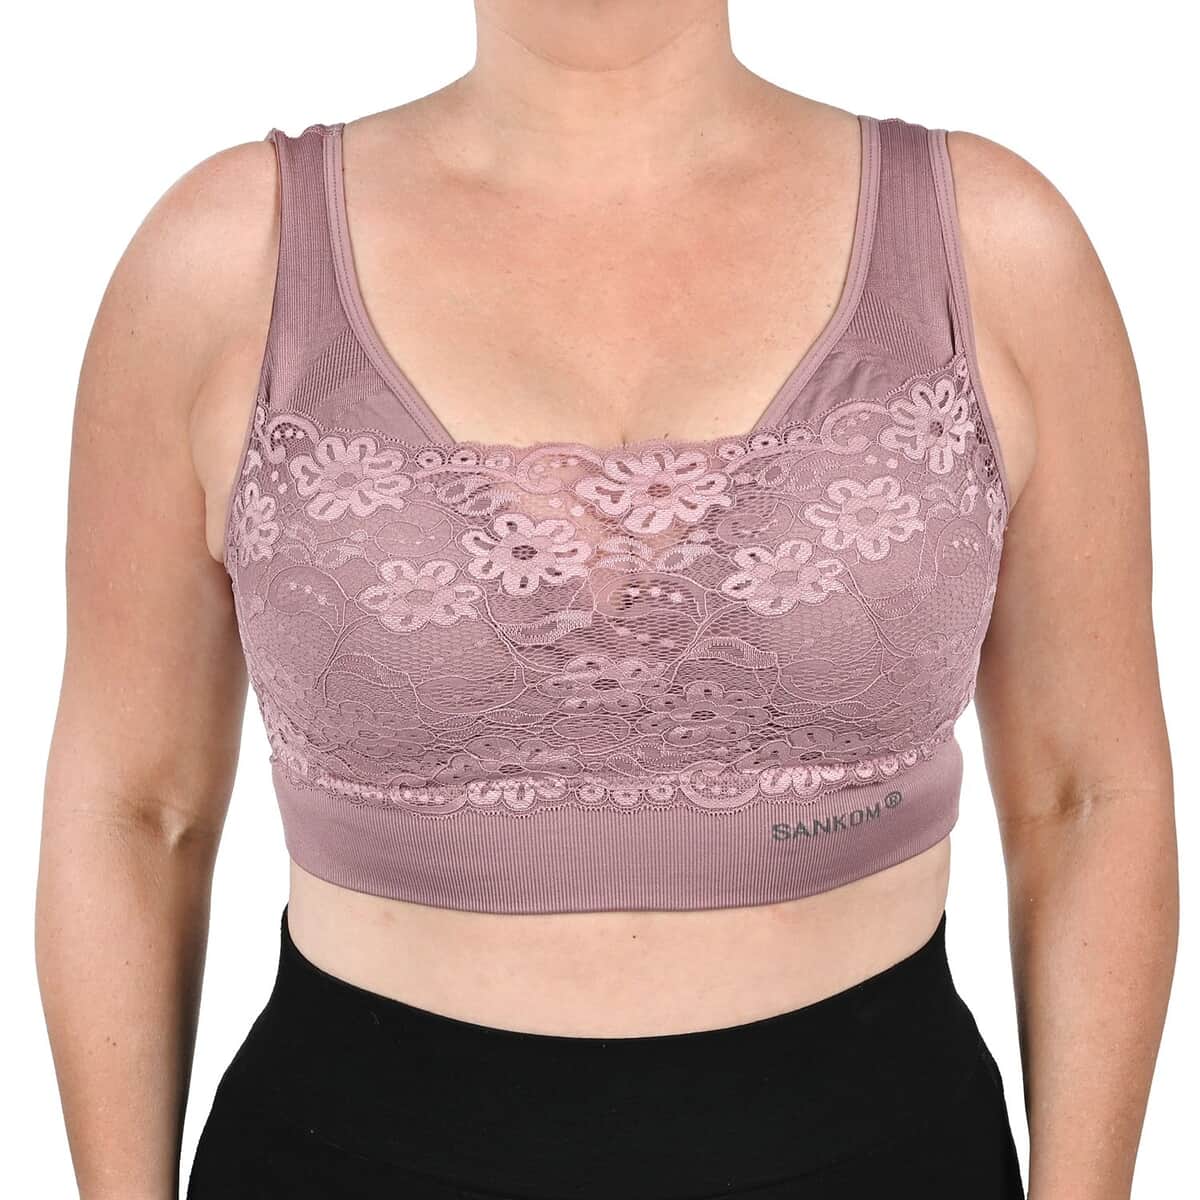 Sankom Patent Support & Posture Lace Bra with Aloe Vera Fibers - M , Dusty Rose image number 0